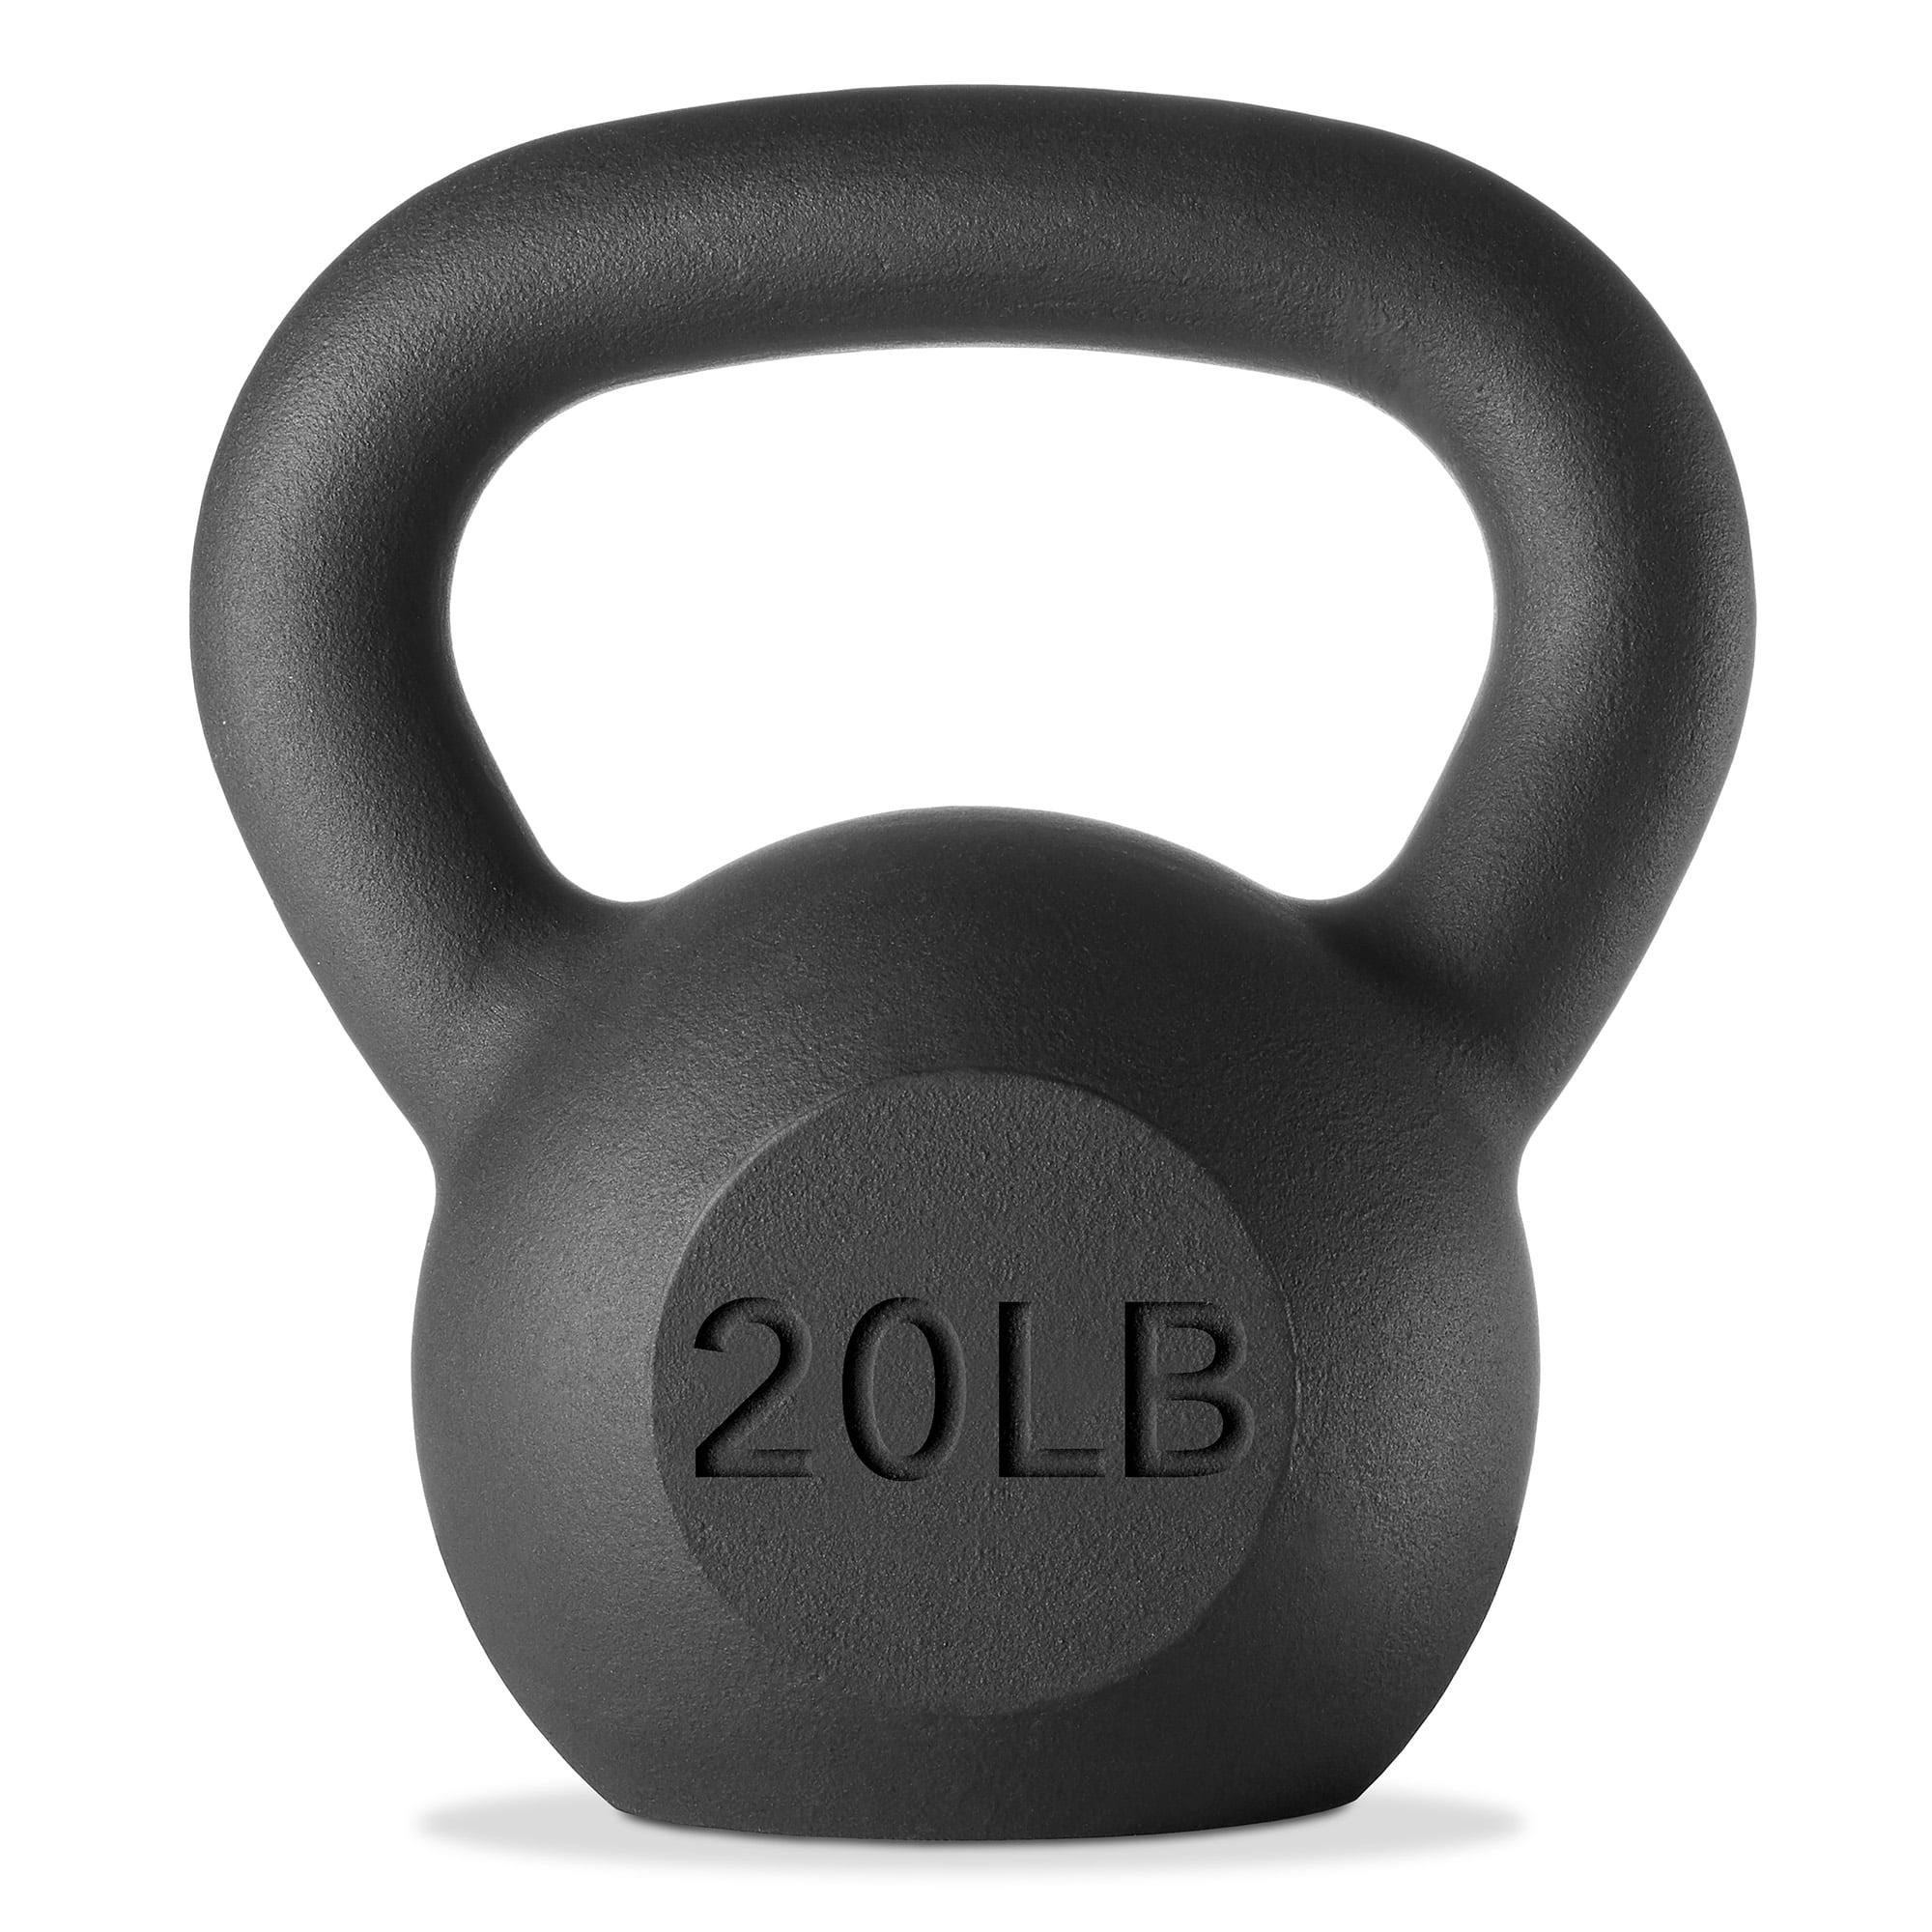 crossfit Gym Fitness Brand New Cast Iron 20 kg Kettlebell, 